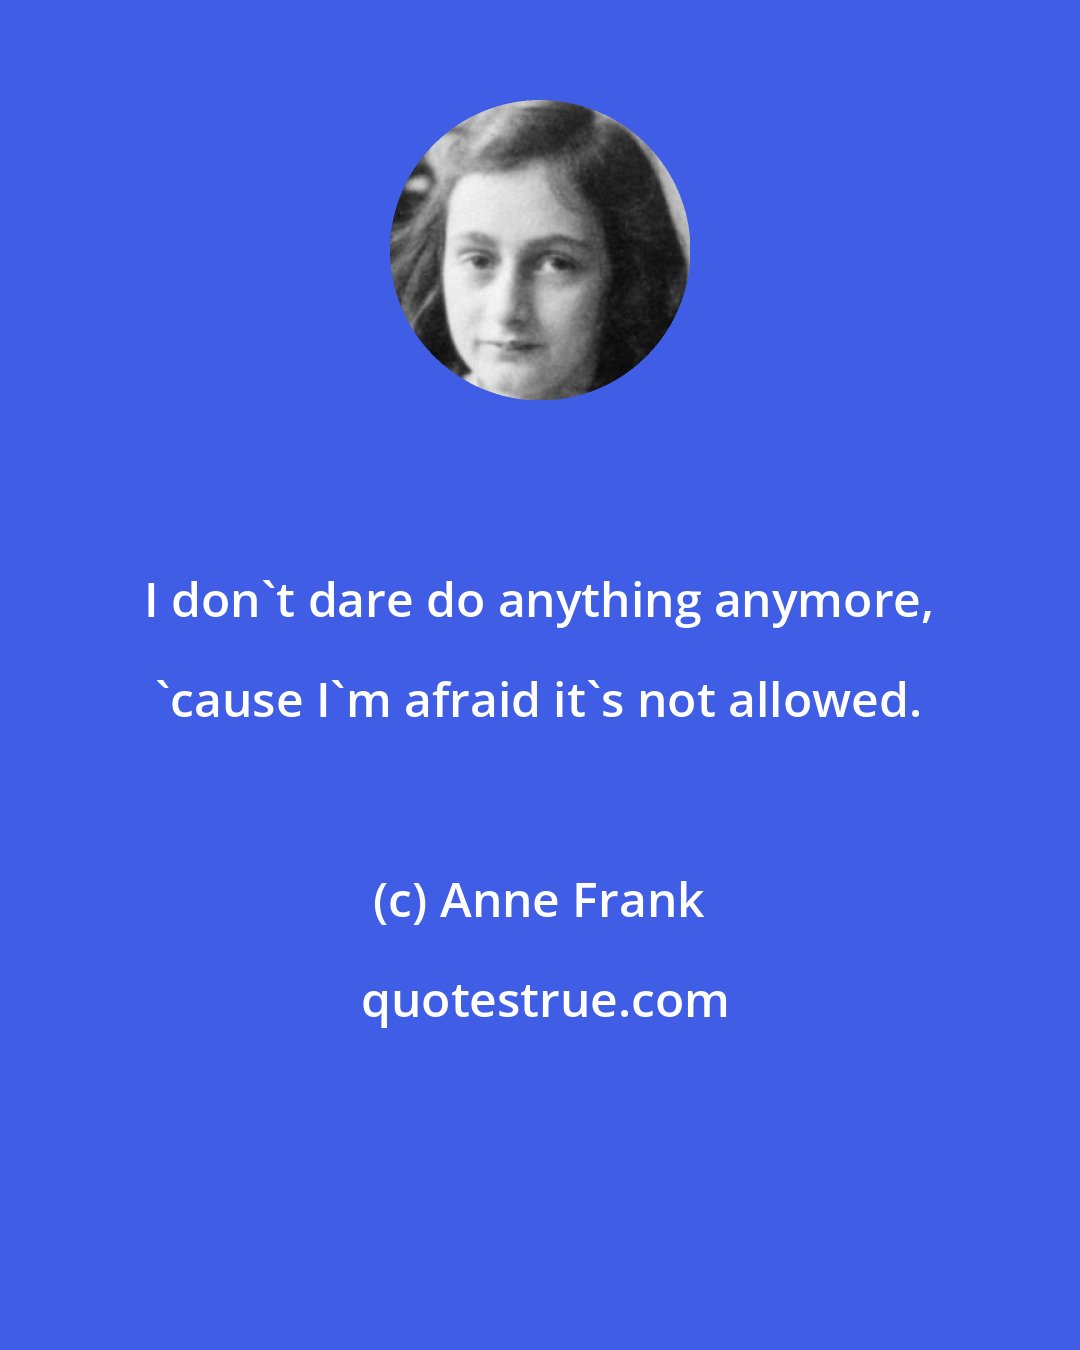 Anne Frank: I don't dare do anything anymore, 'cause I'm afraid it's not allowed.